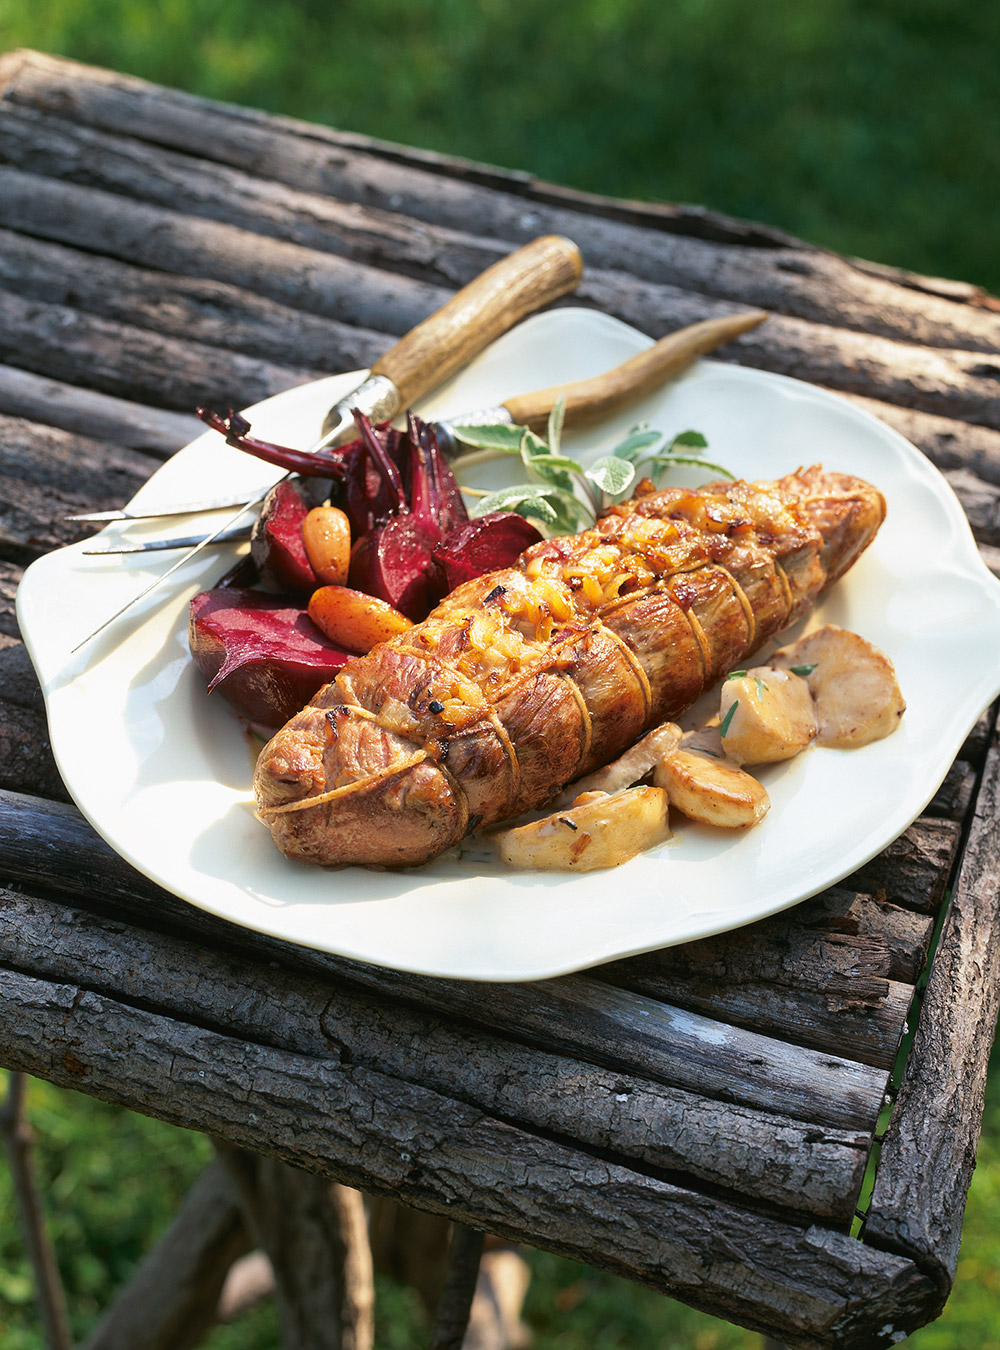 Pork Tenderloin Stuffed with Caramelized Onions and Apples